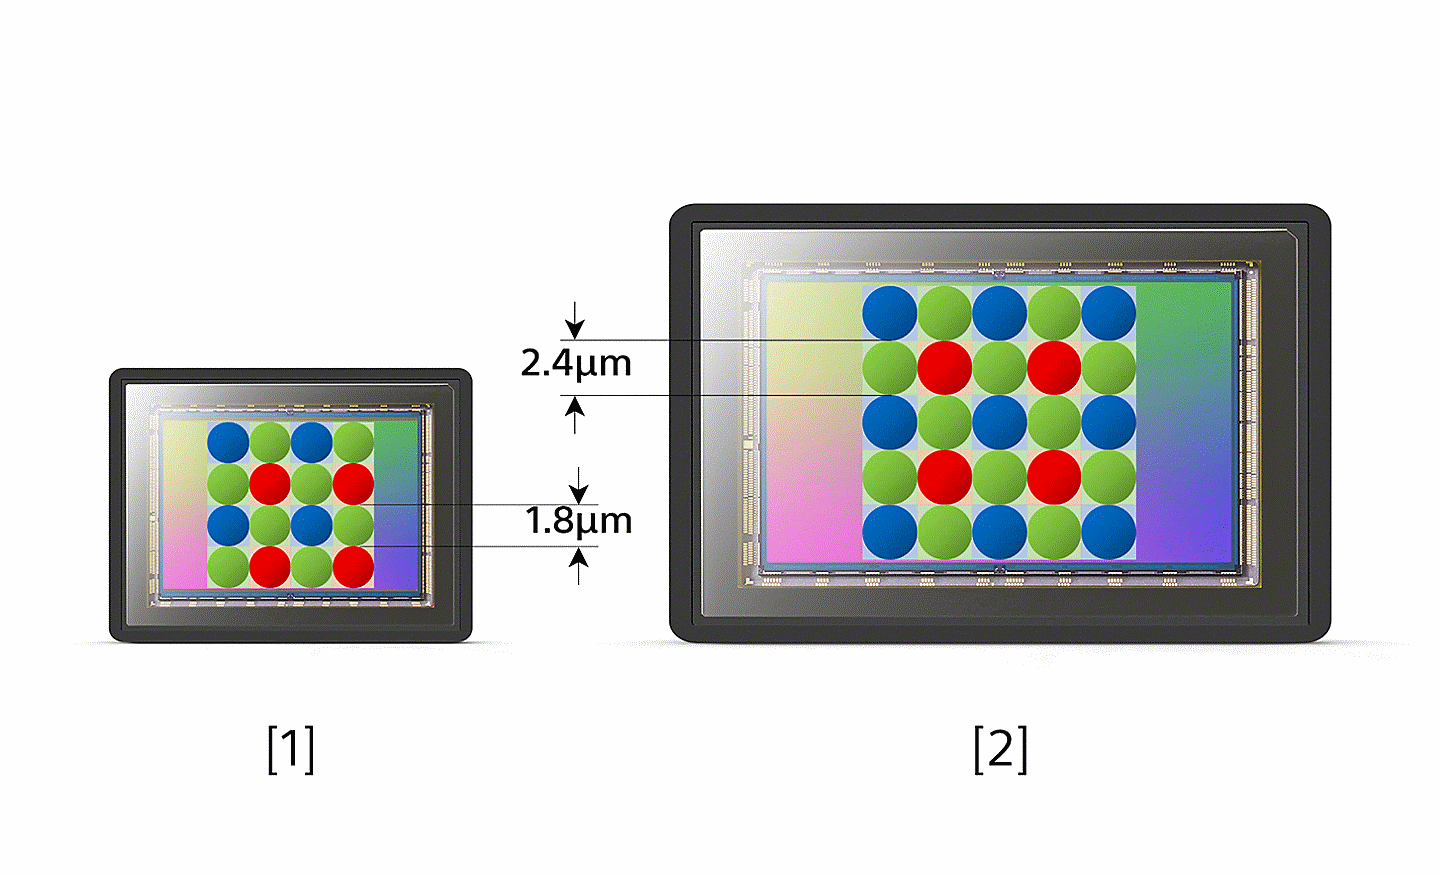 Diagram comparing pixel pitch of conventional image sensor with Xperia's 1.0-type image sensor